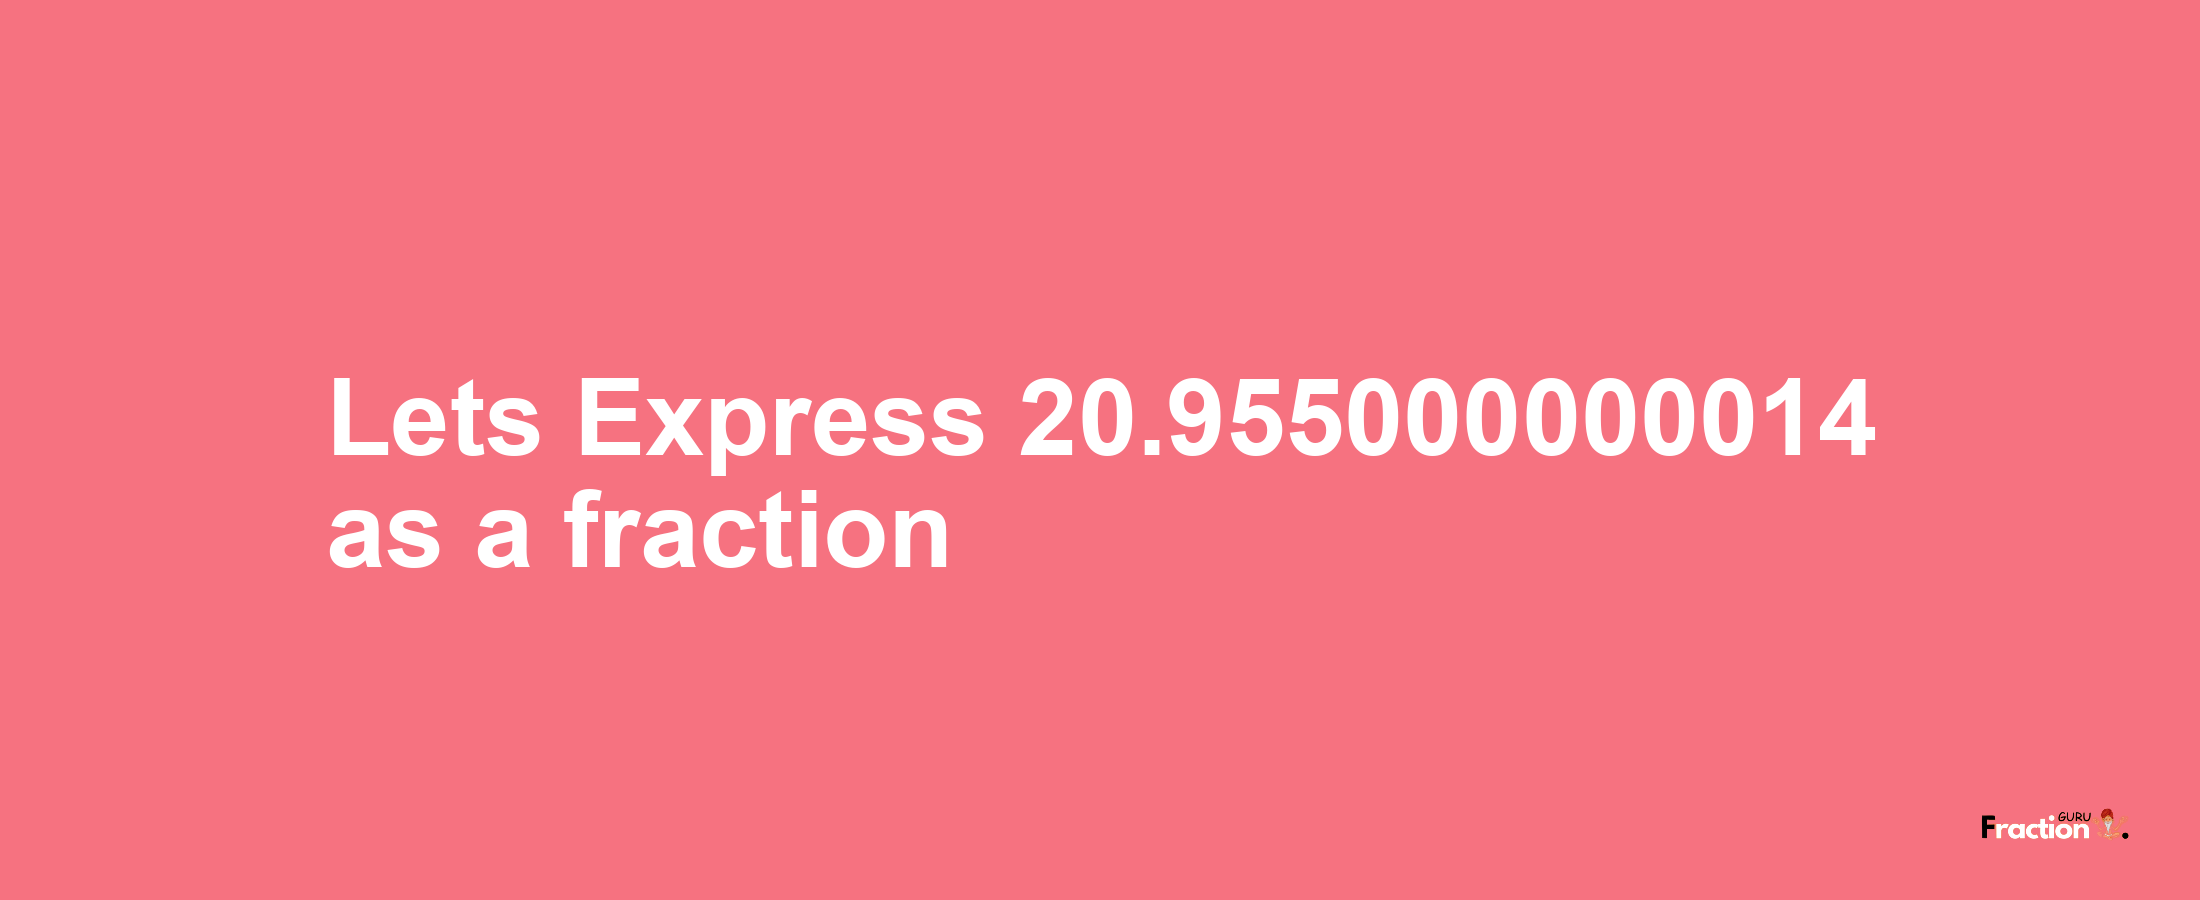 Lets Express 20.955000000014 as afraction